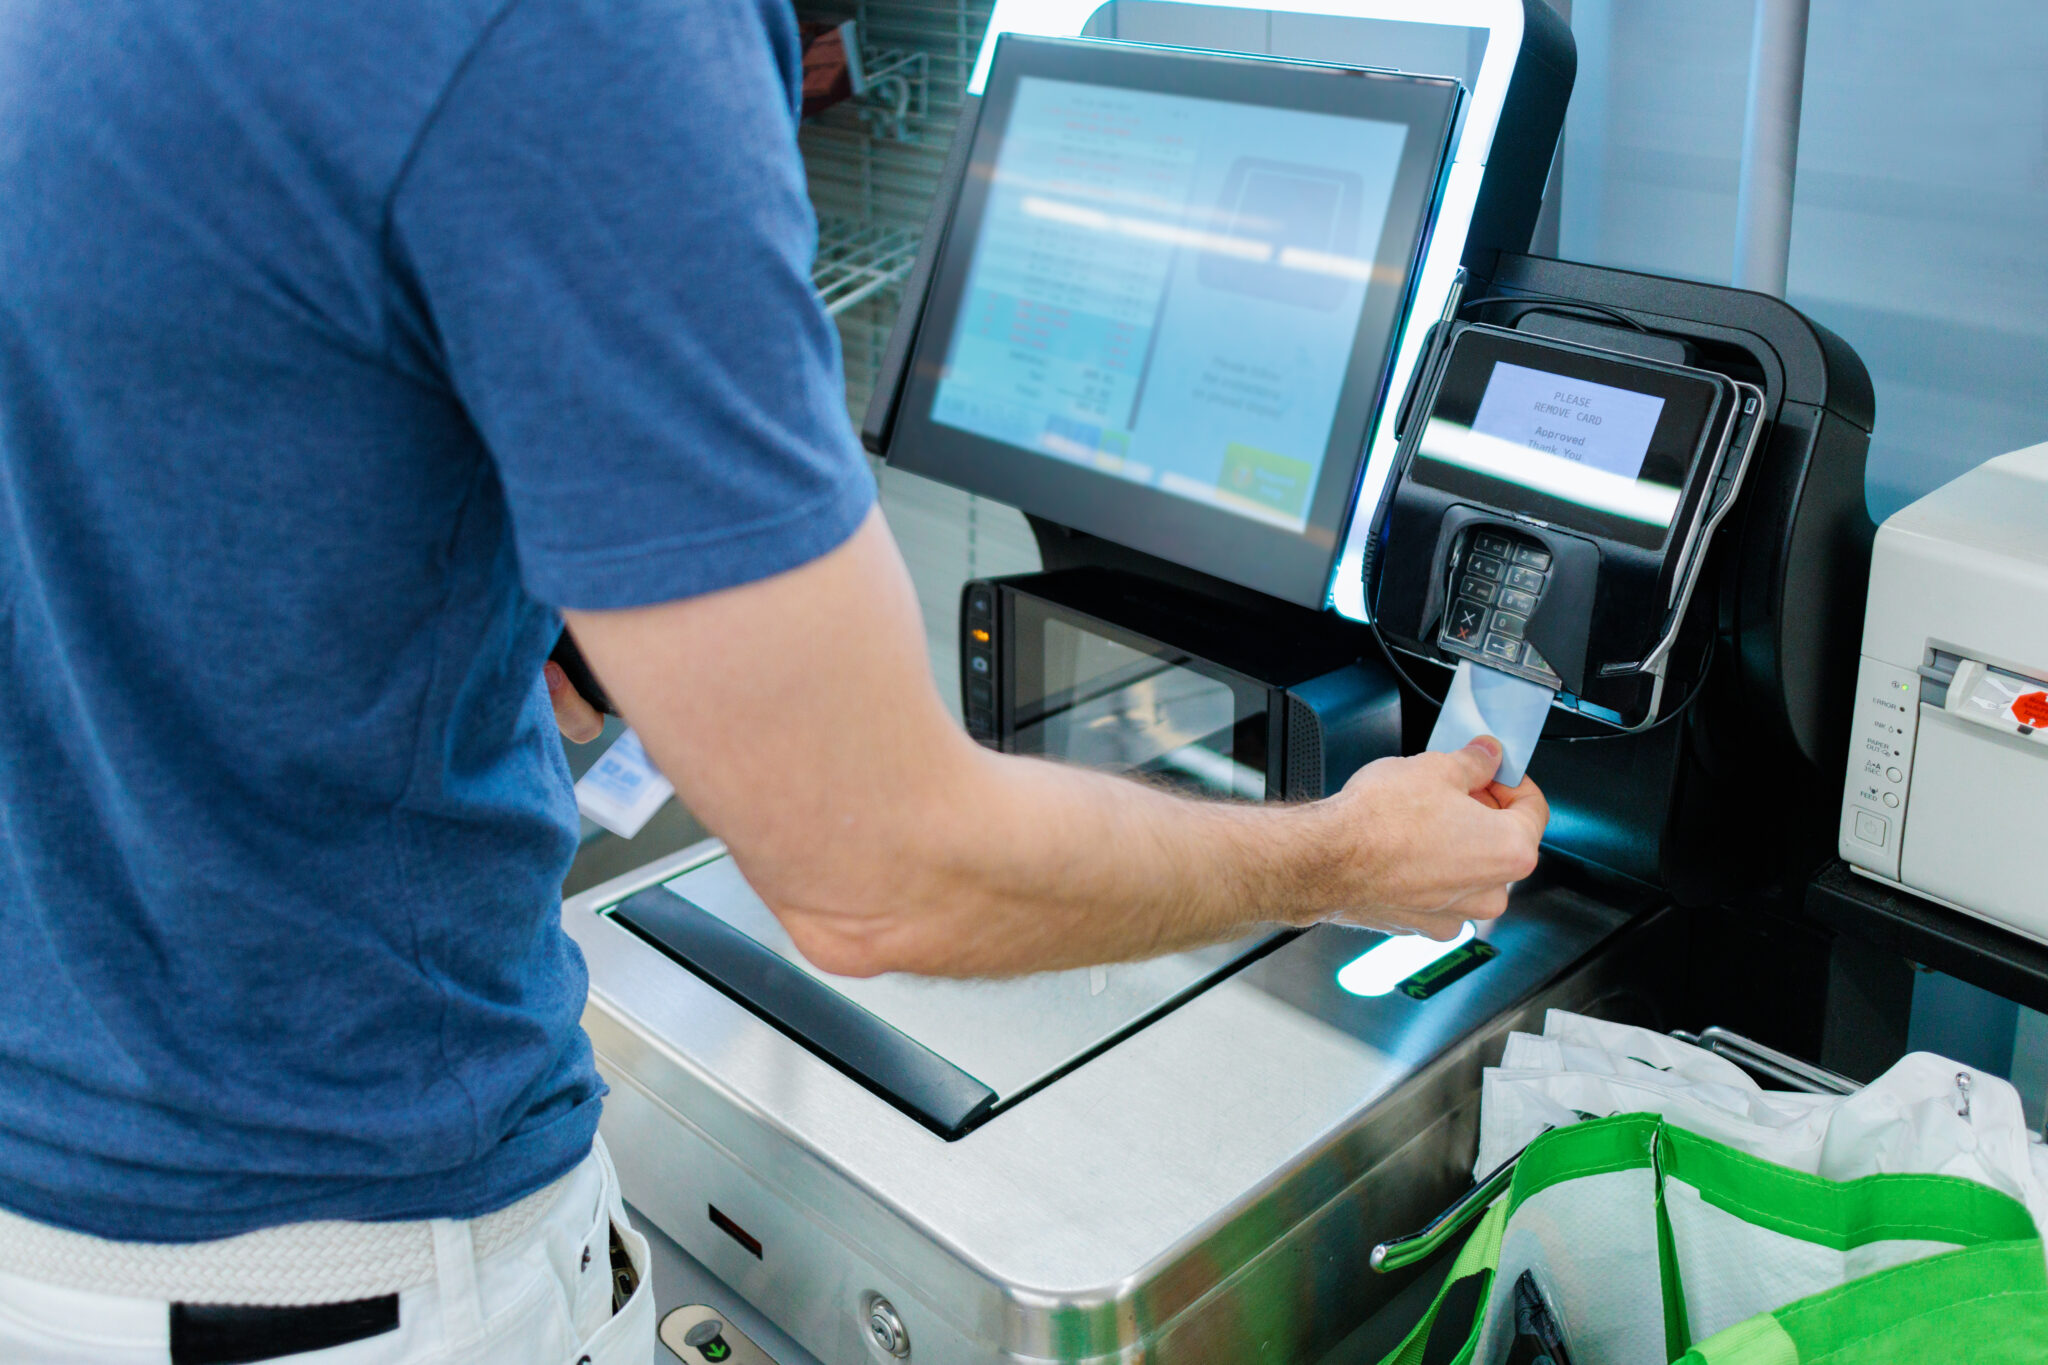 The receipt scanners must scan your receipt before leaving or an alarm will go off